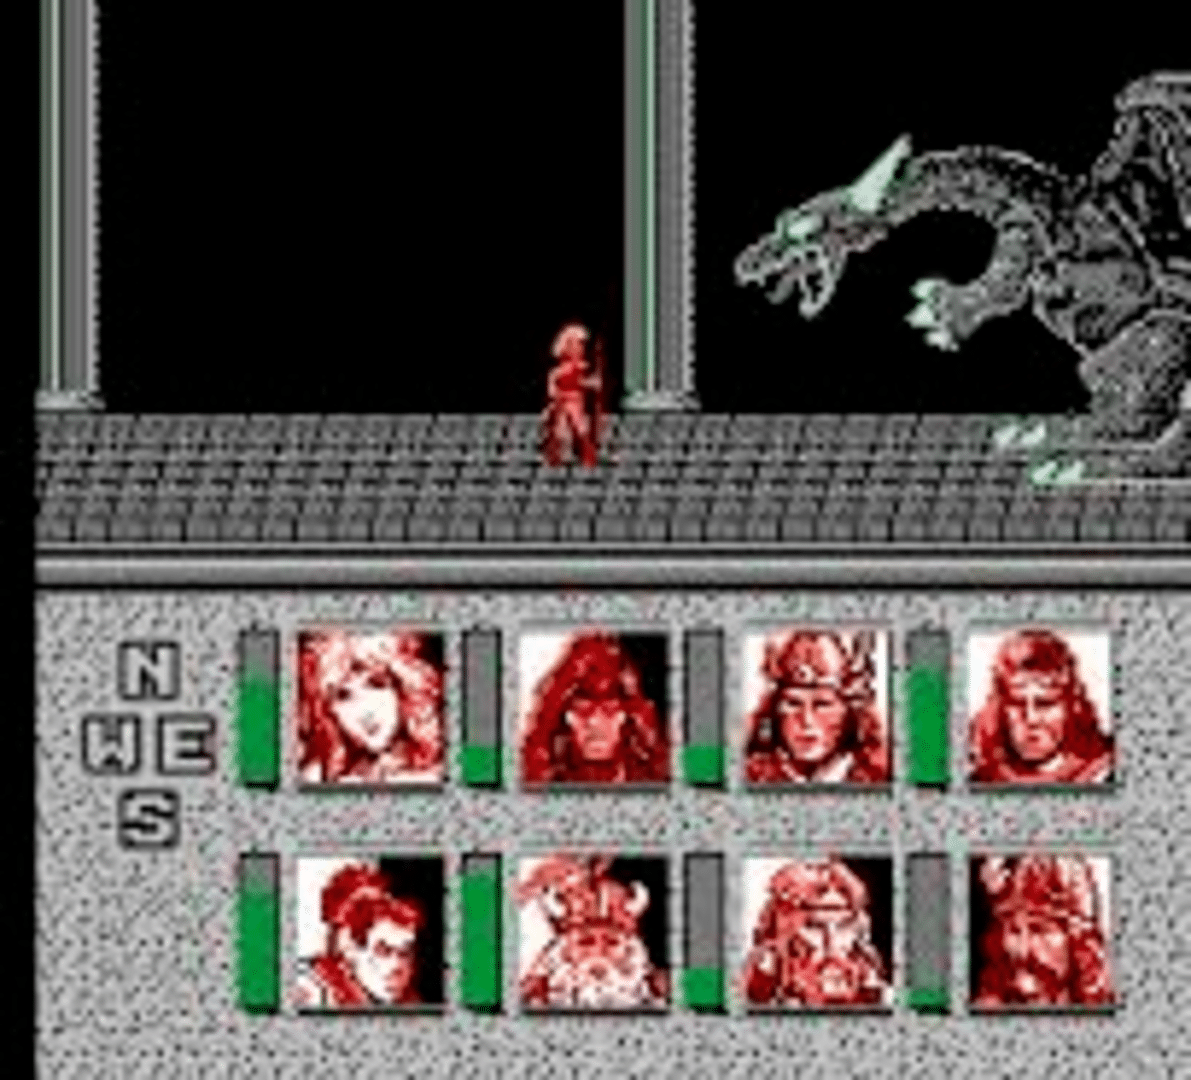 Advanced Dungeons & Dragons: Heroes of the Lance screenshot